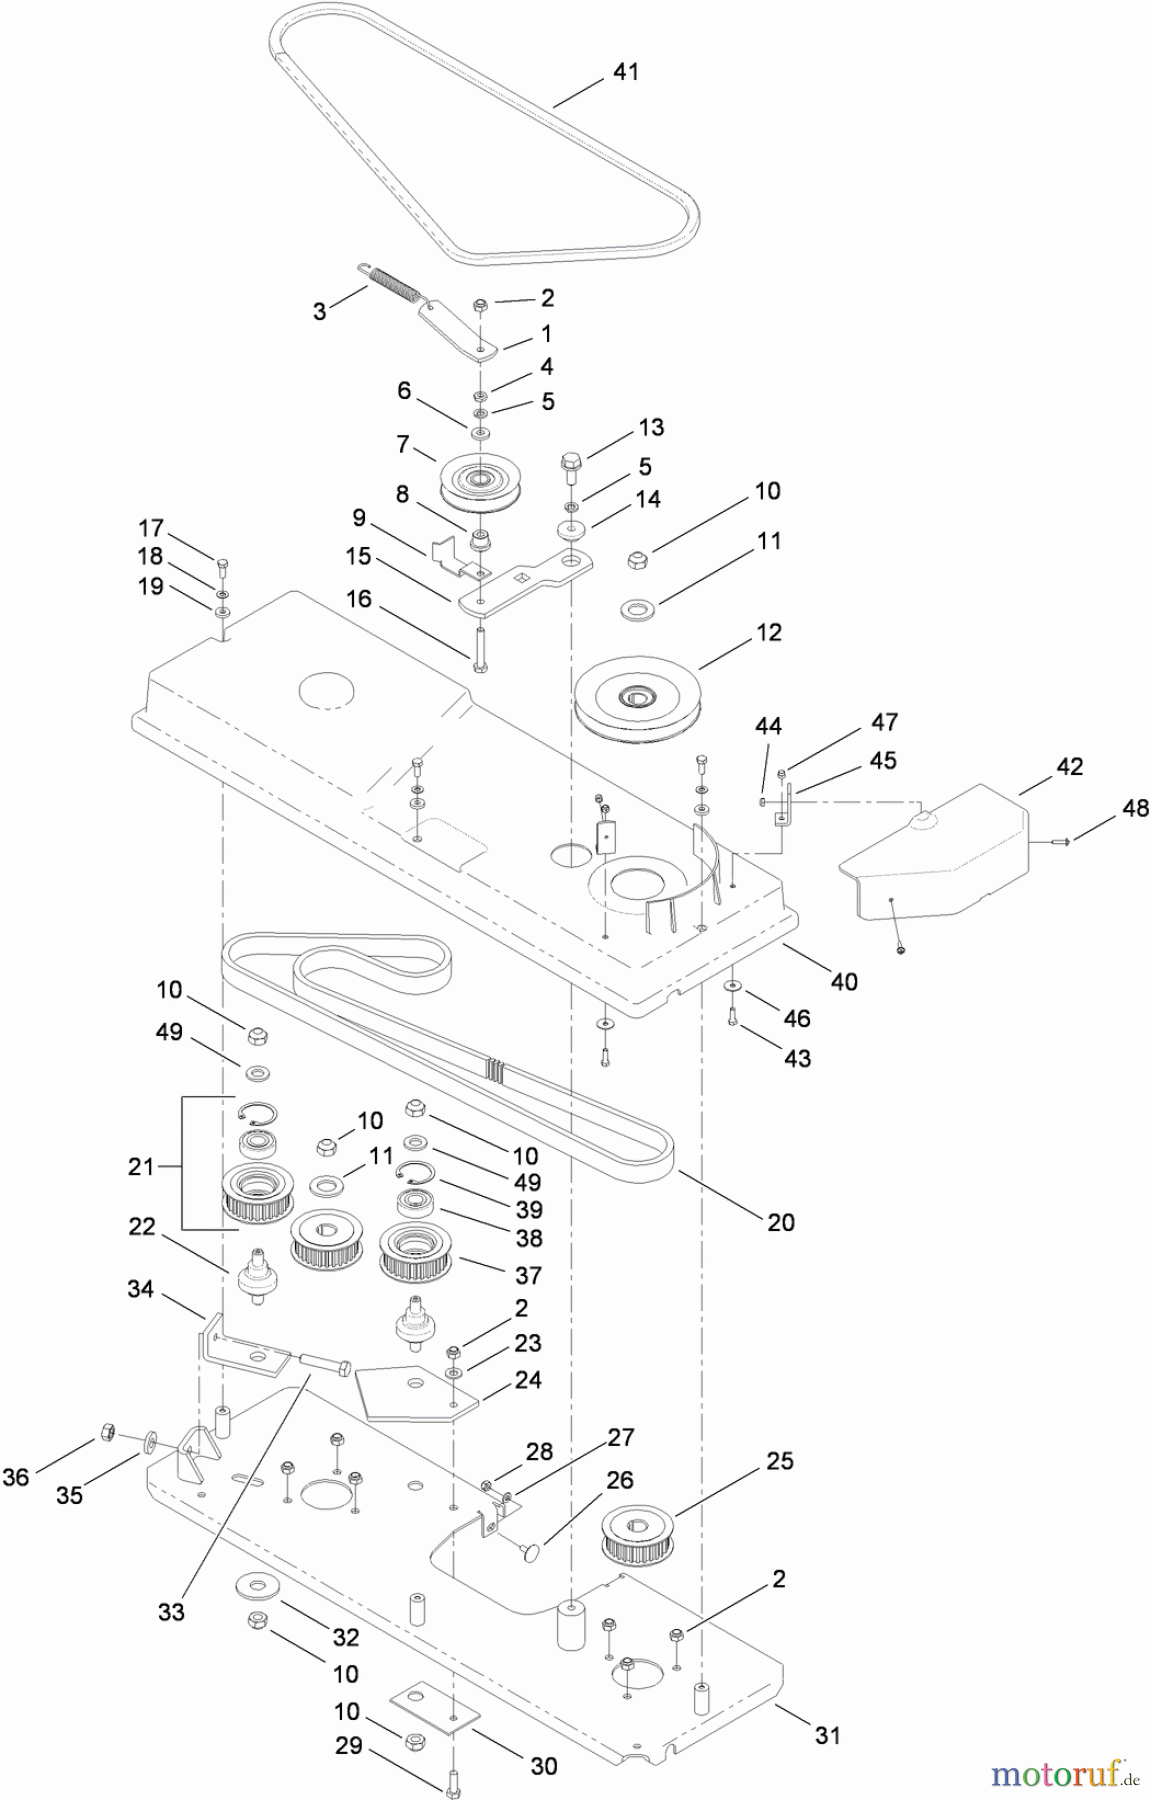  Toro Neu Mowers, Lawn & Garden Tractor Seite 1 74593 (DH 220) - Toro DH 220 Lawn Tractor, 2011 (311000401-311999999) CUTTING PAN AND DRIVE SYSTEM ASSEMBLY